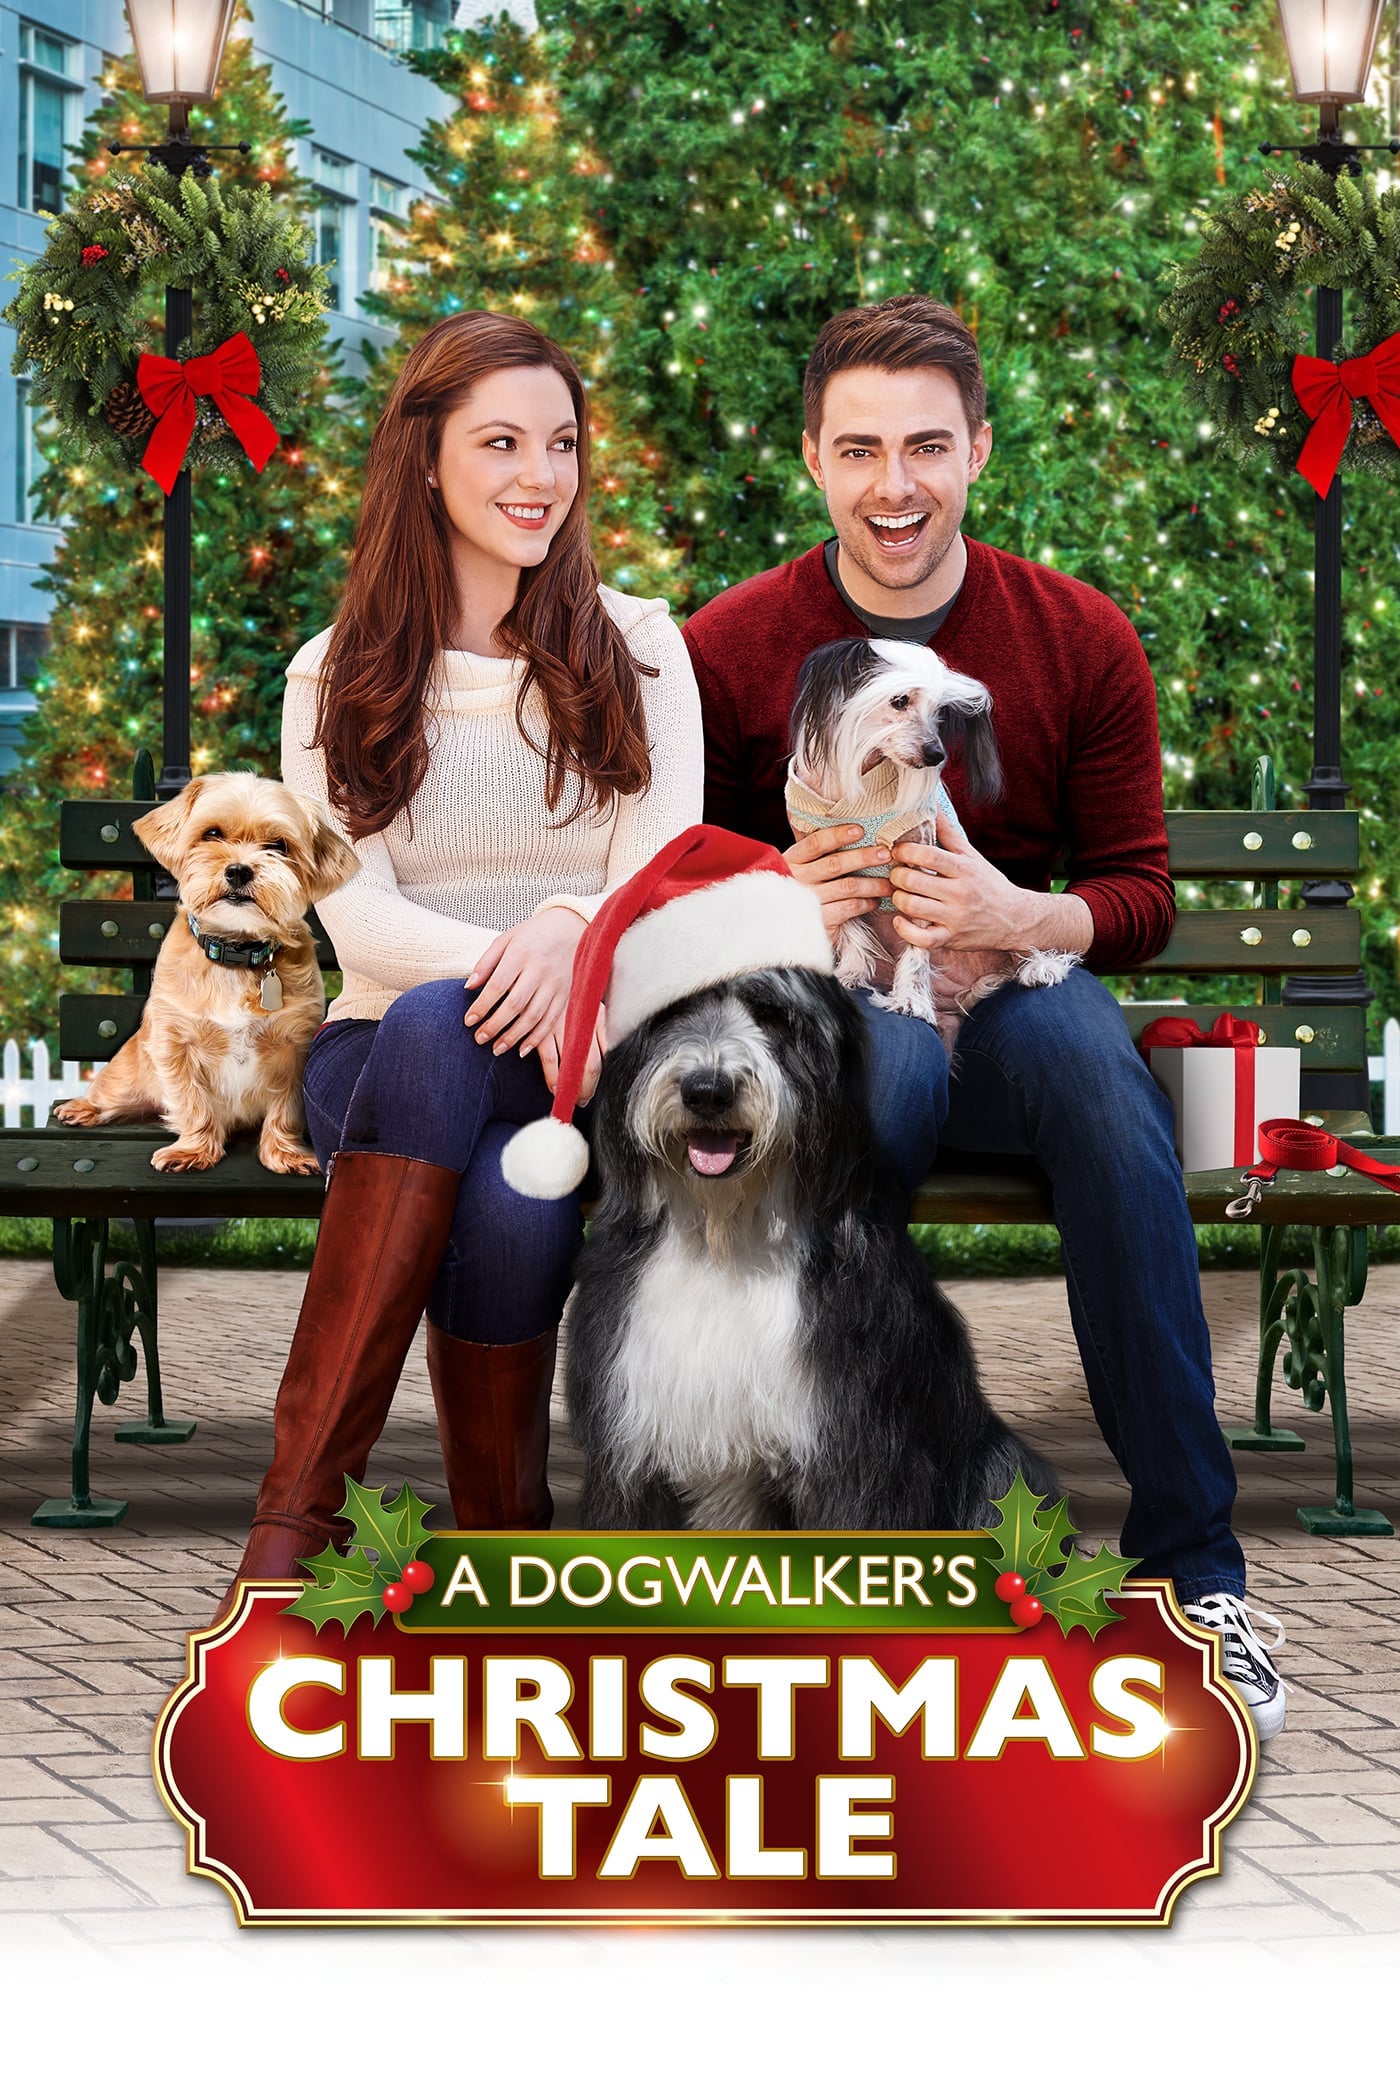 A Dogwalker's Christmas Tale - 123movies | Watch Online Full Movies TV Series | Gomovies ...